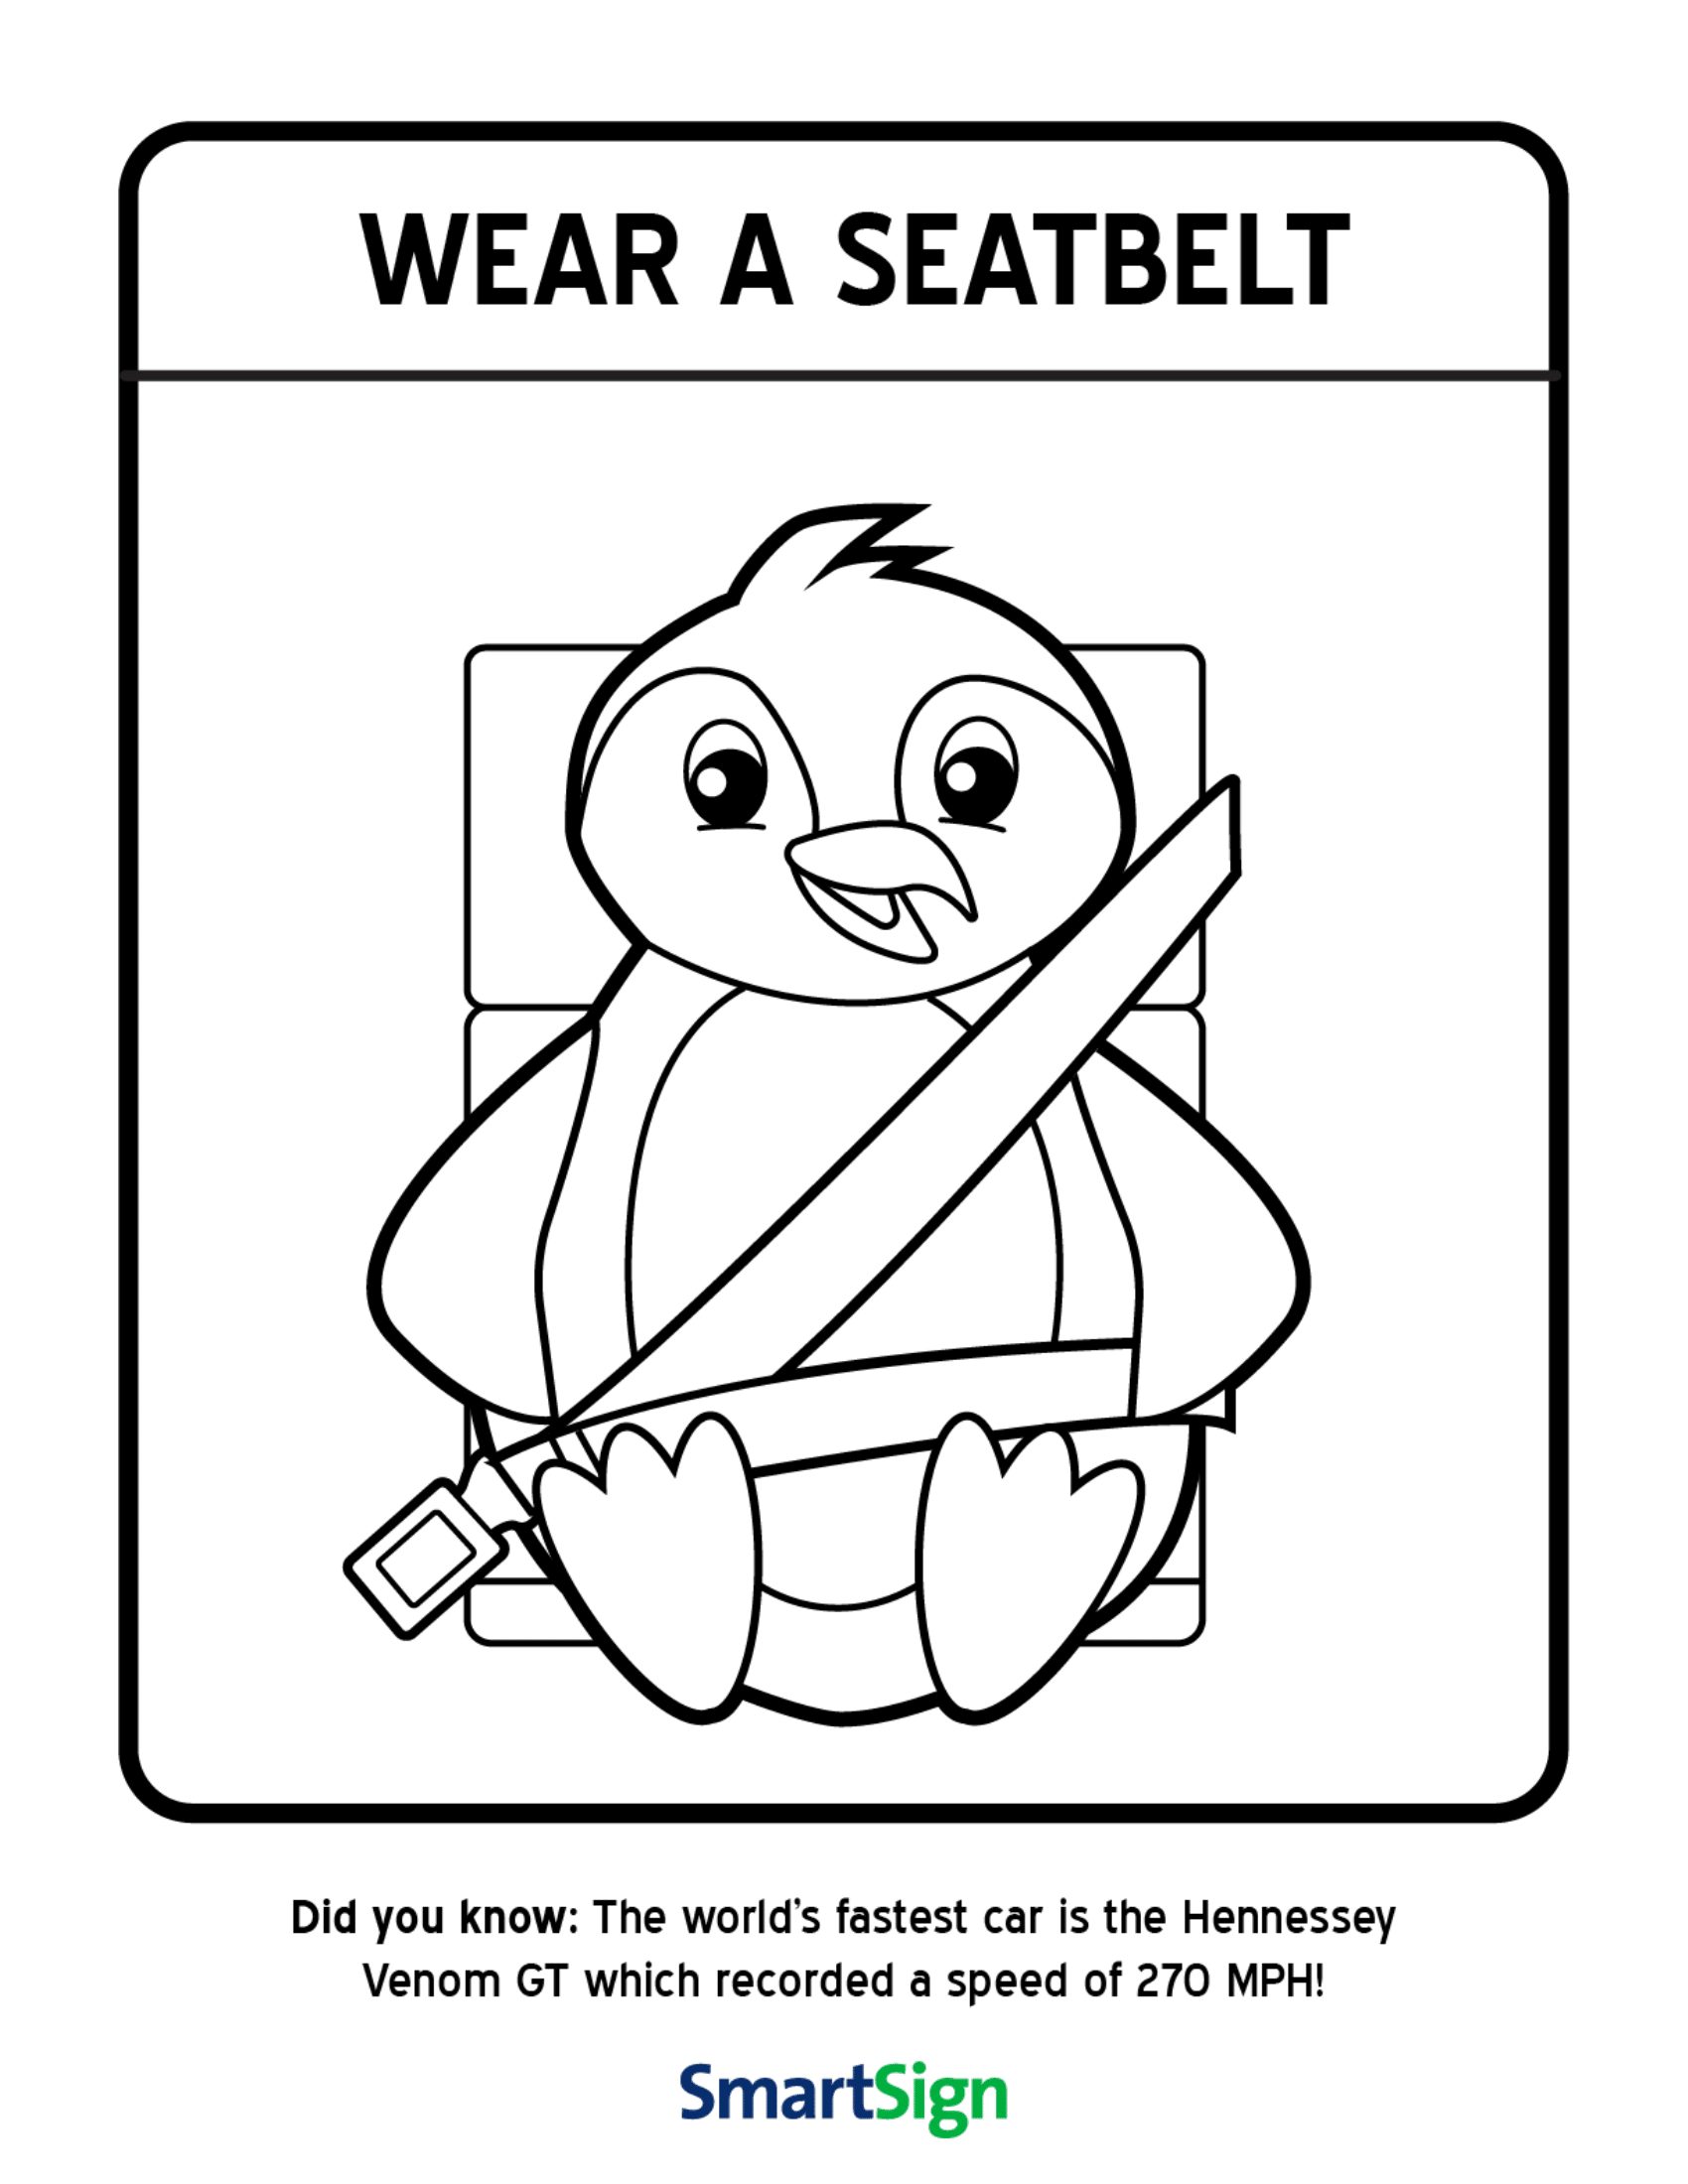 Safety Coloring Printable for Kids Wear a Seatbelt. Pics4Learning